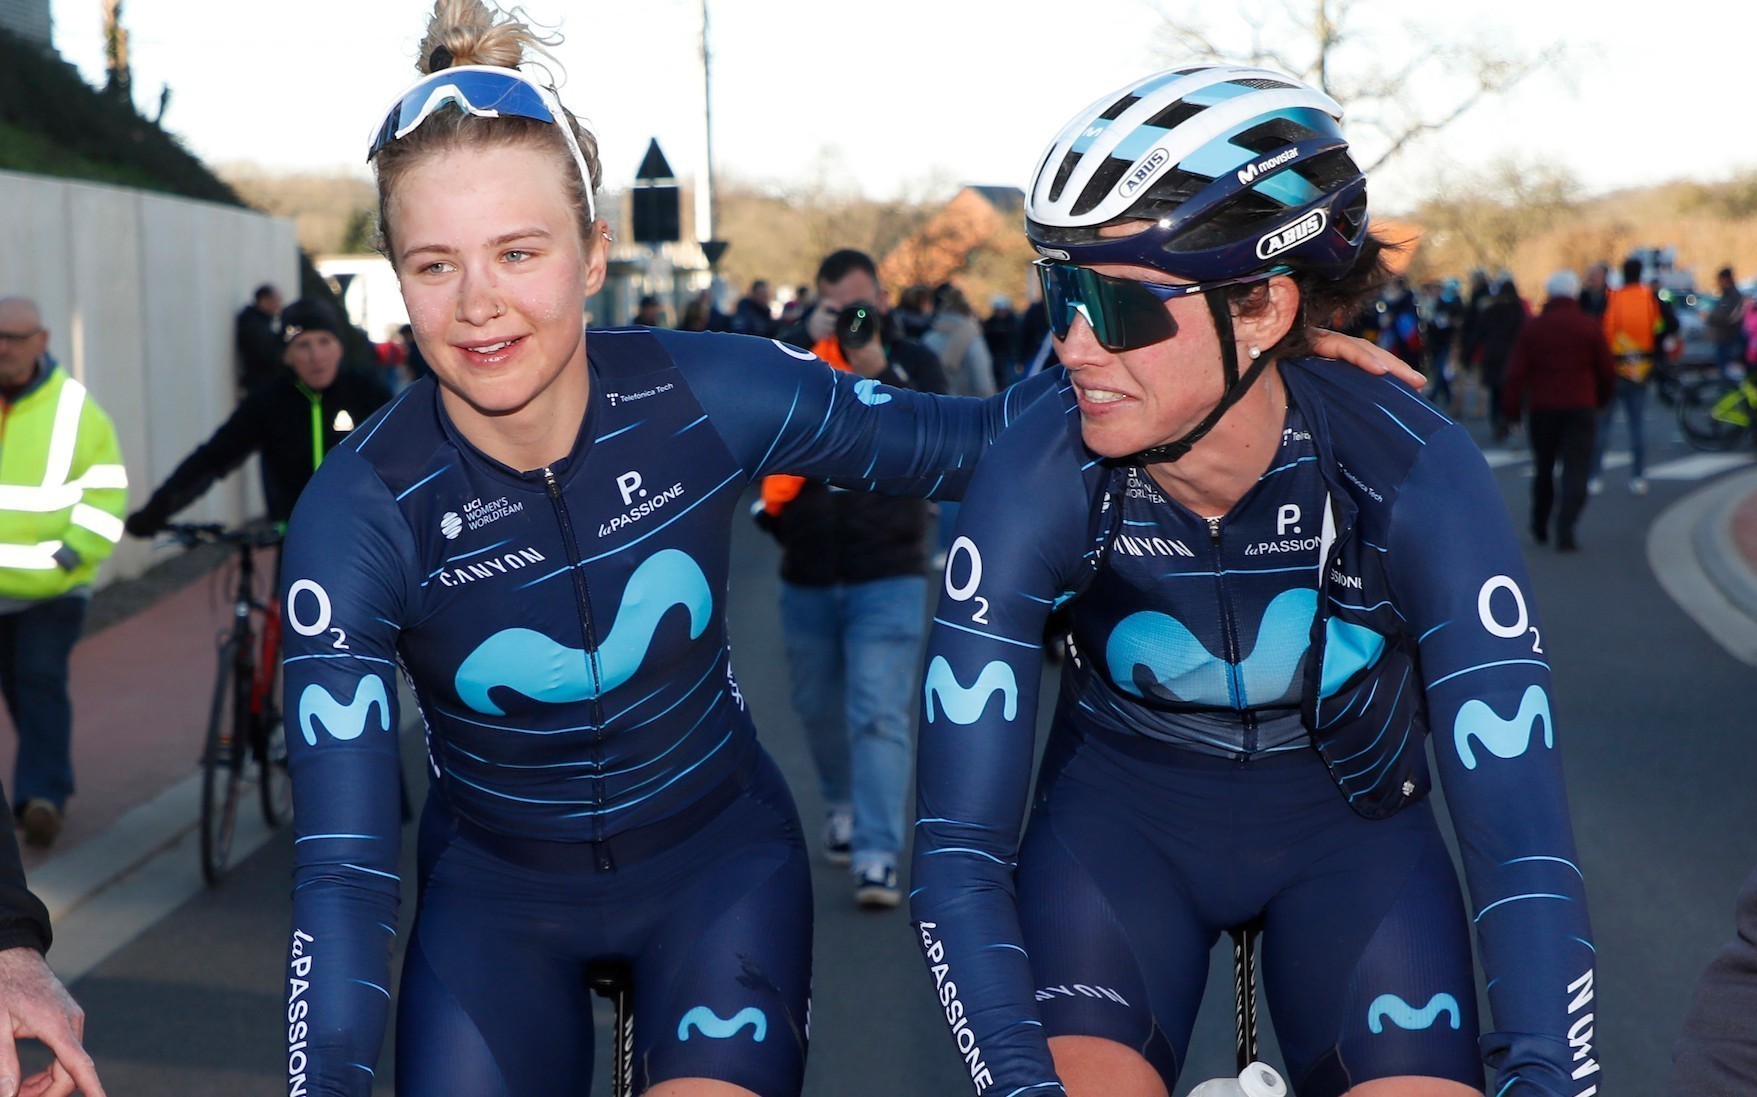 Aude Biannic, ‘a lifetime’ with Movistar Team: renewed until 2024